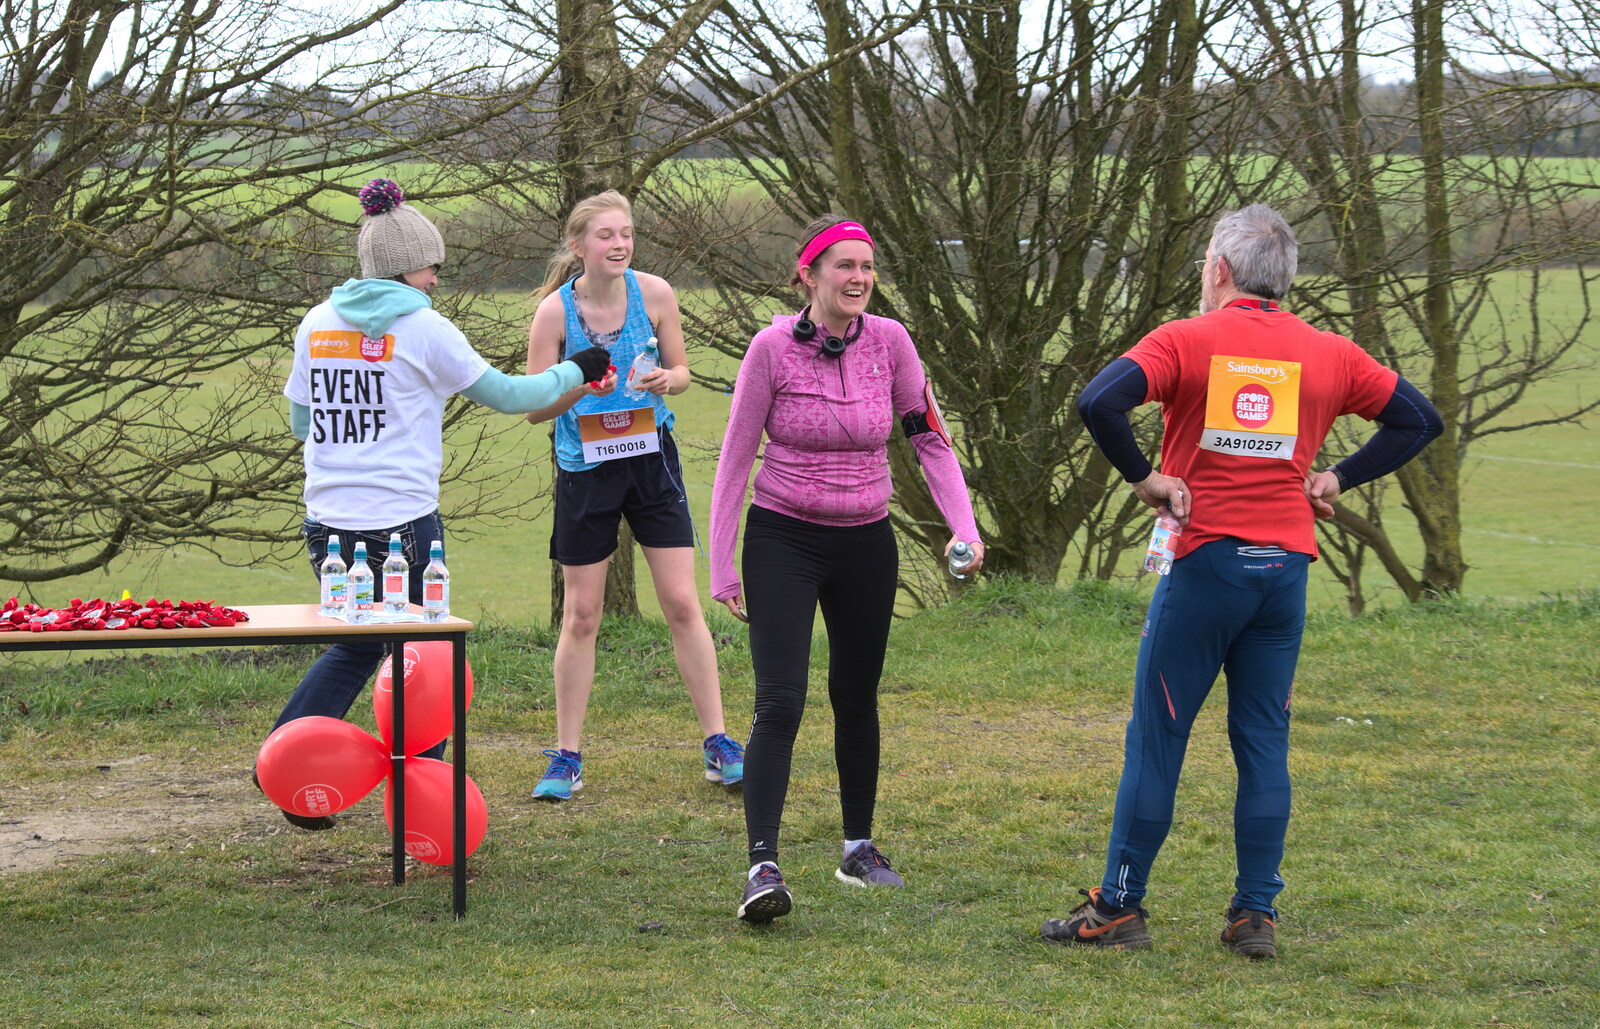 Isobel after the finish from Isobel's Hartismere Run, Castleton Way, Eye, Suffolk - 16th March 2016